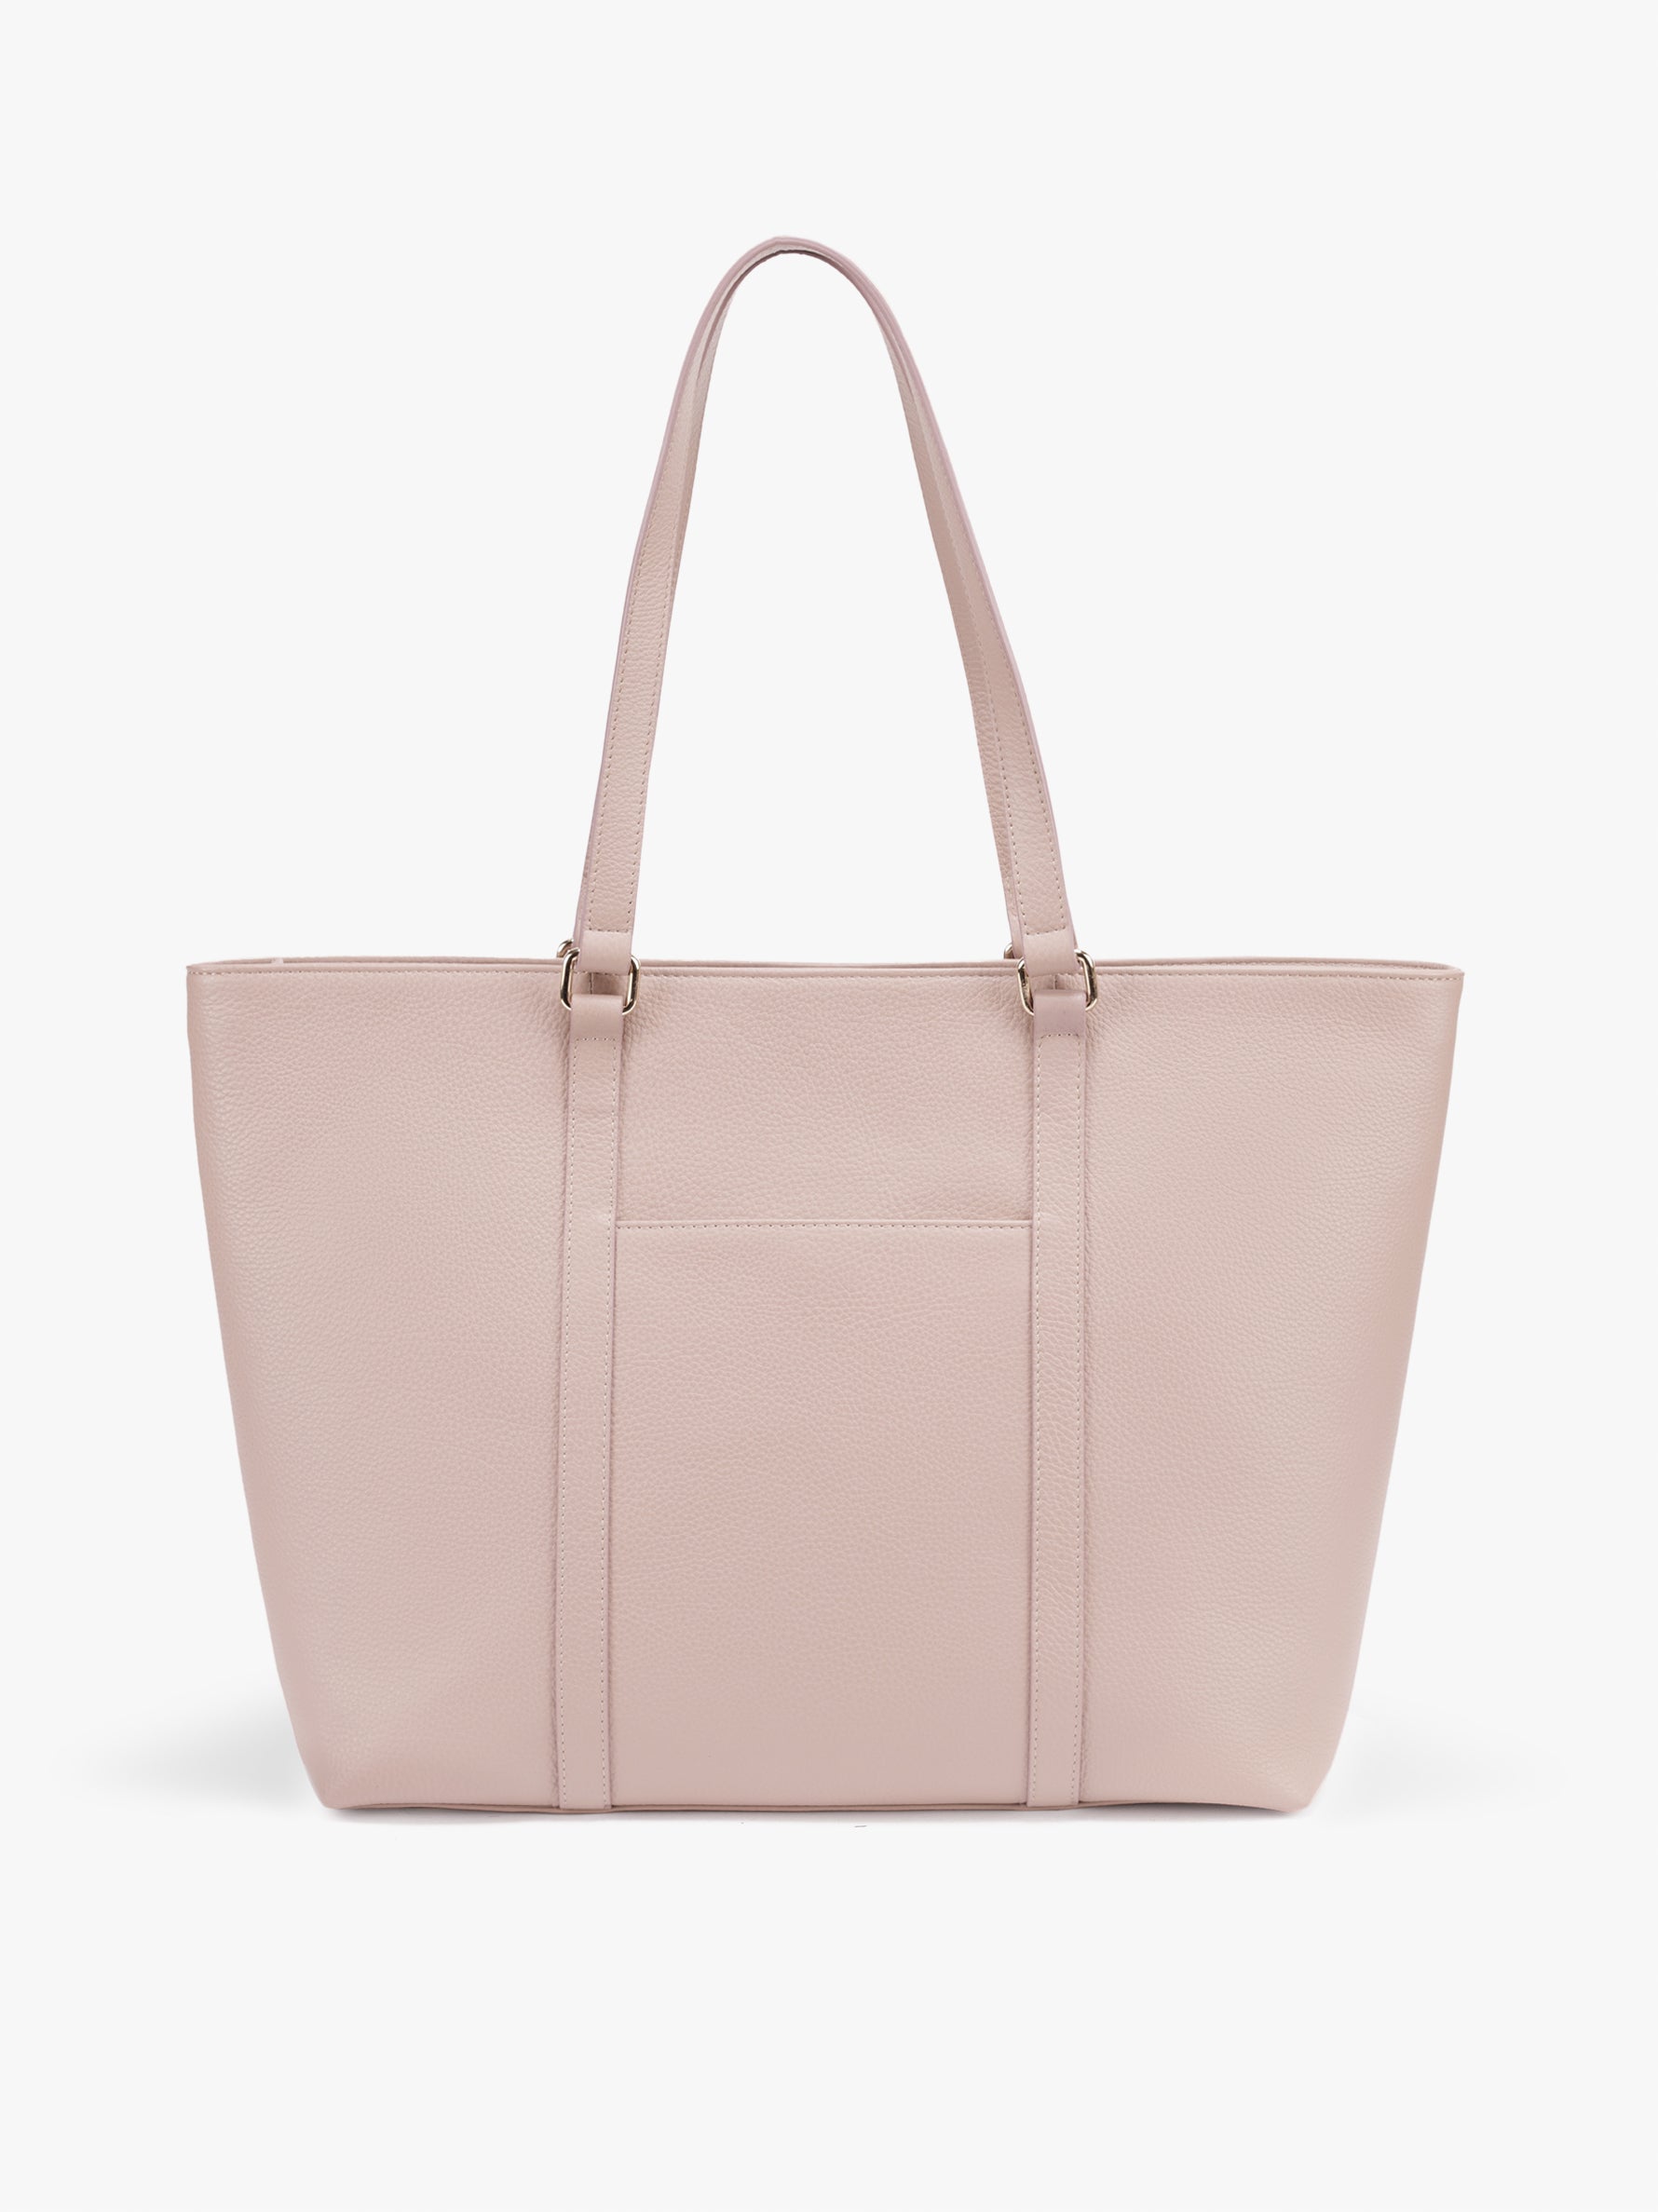 Handcrafted genuine leather office tote bag for women Nude Pink